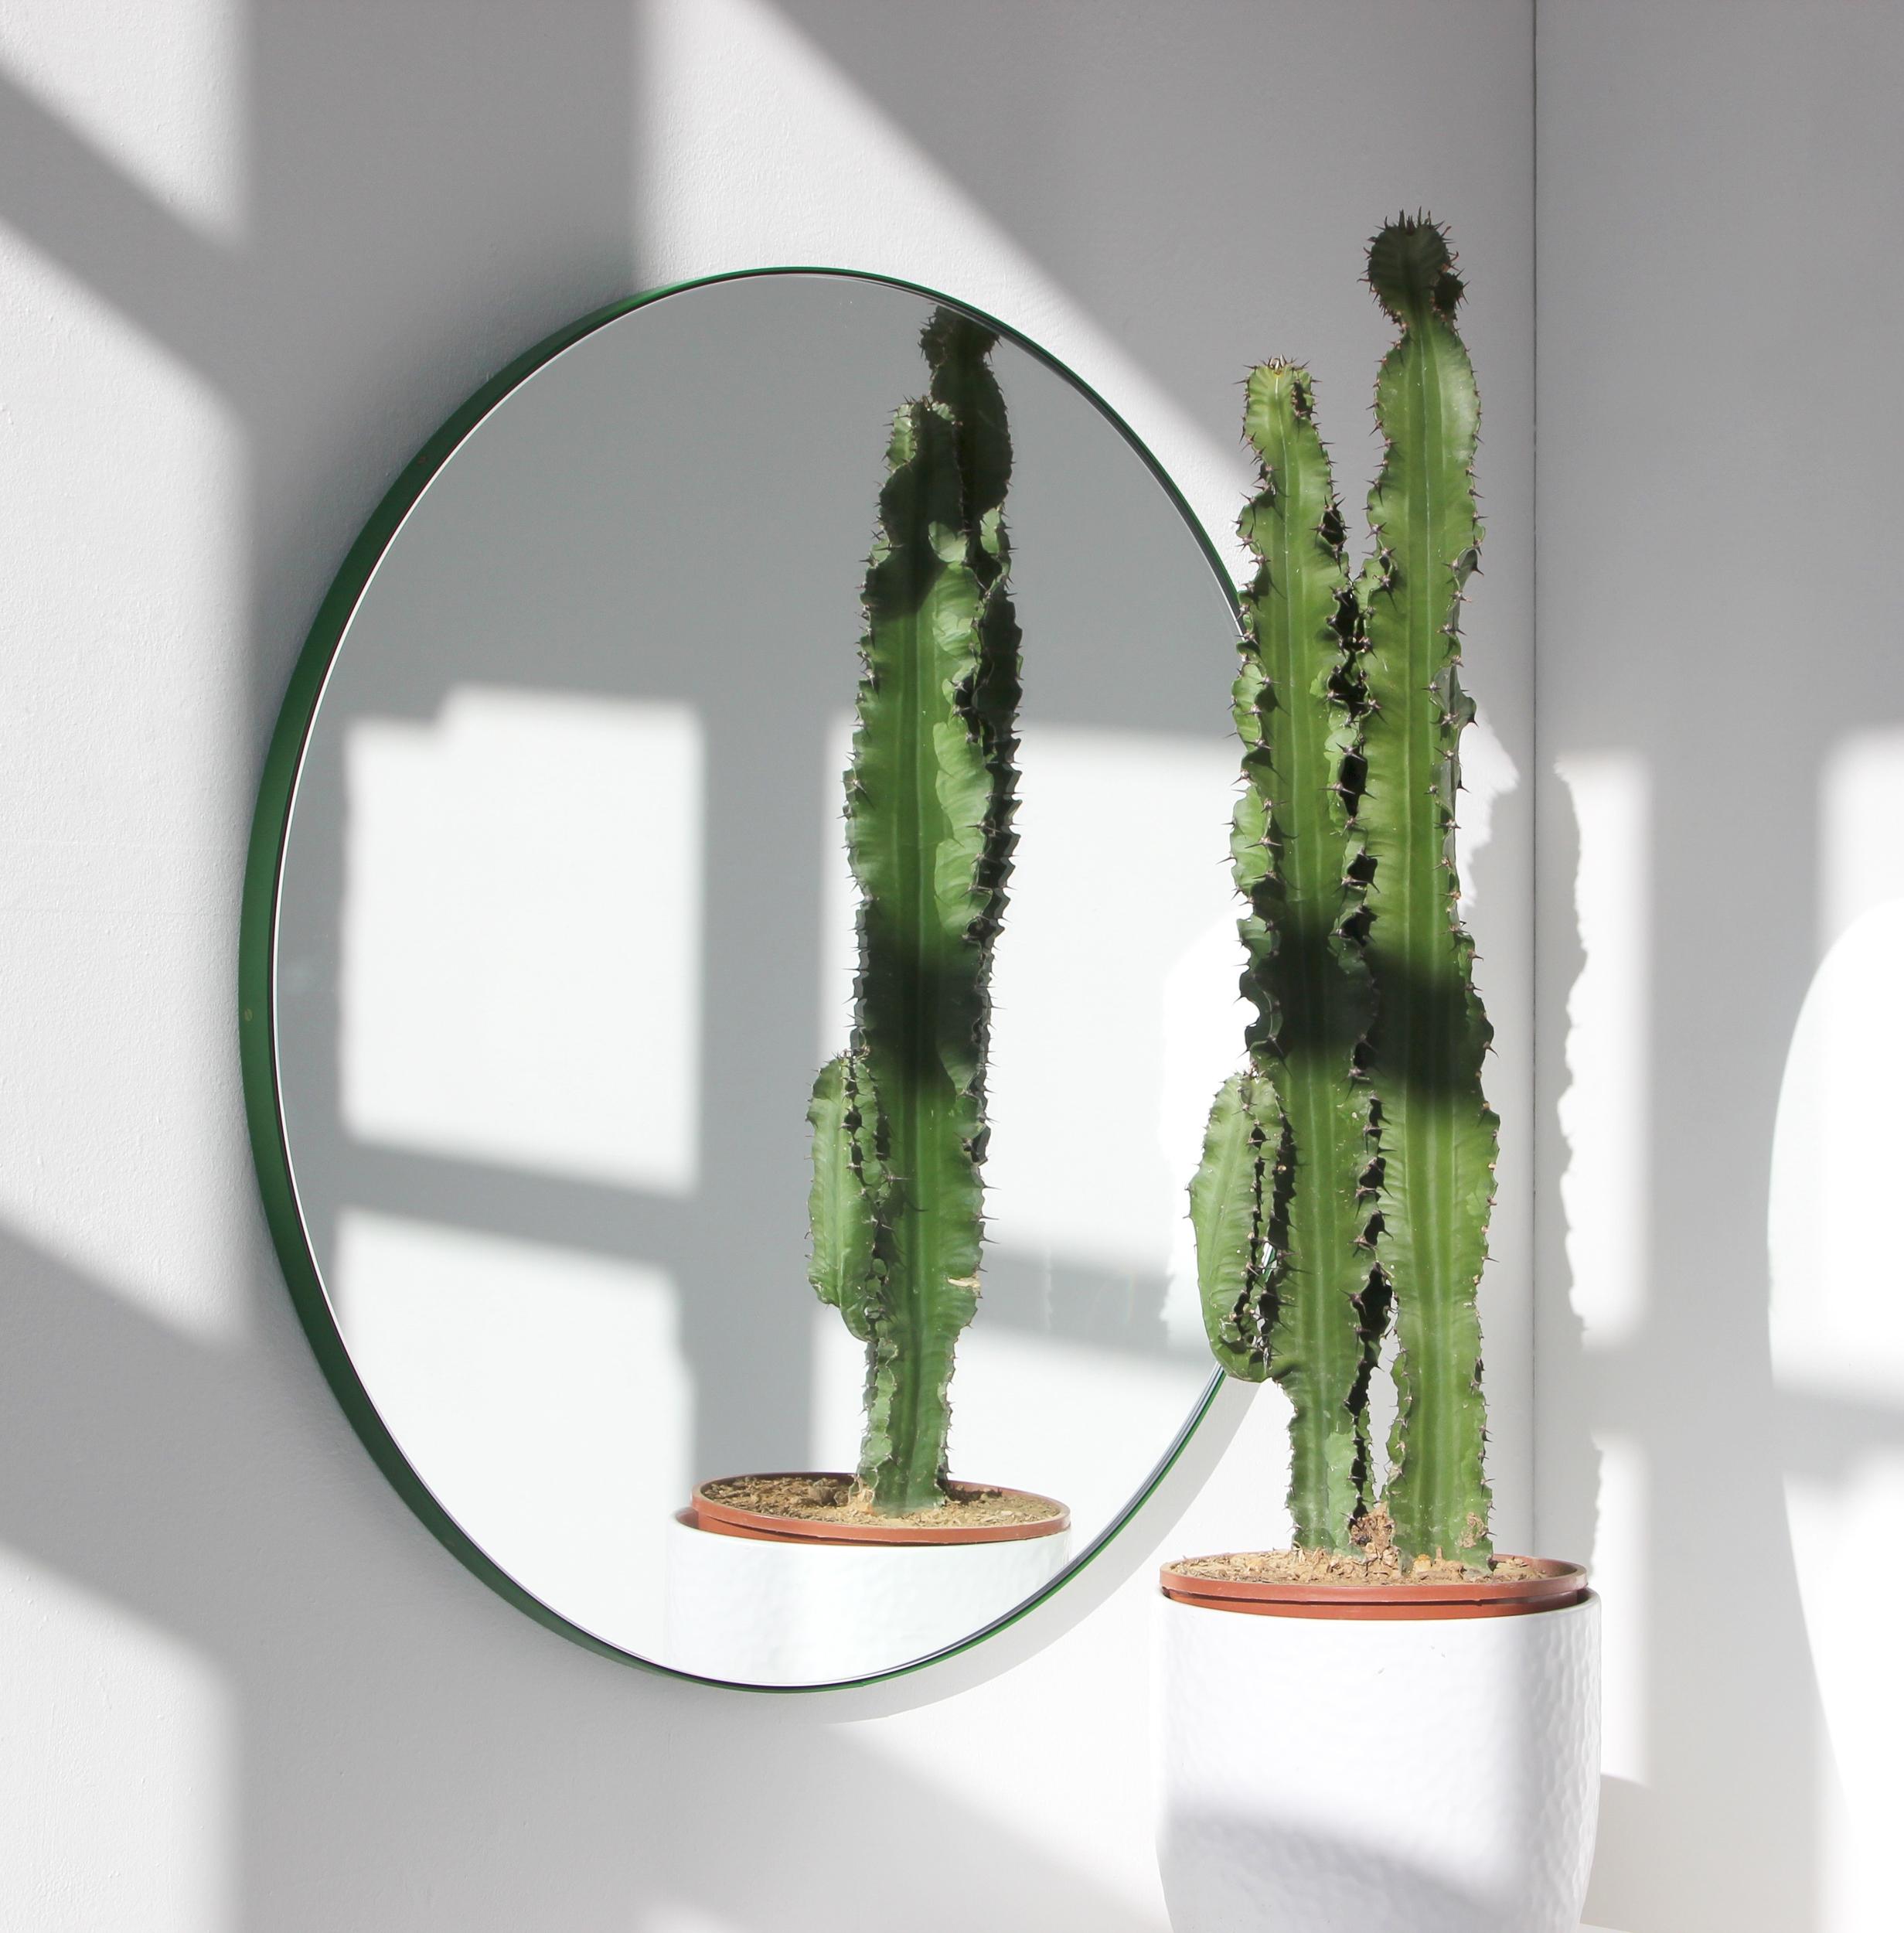 Modern round mirror with a vibrant powder coated aluminium green frame. Designed and handcrafted in London, UK.

Medium, large and extra-large mirrors (60, 80 and 100cm) are fitted with an ingenious French cleat (split batten) system so they may